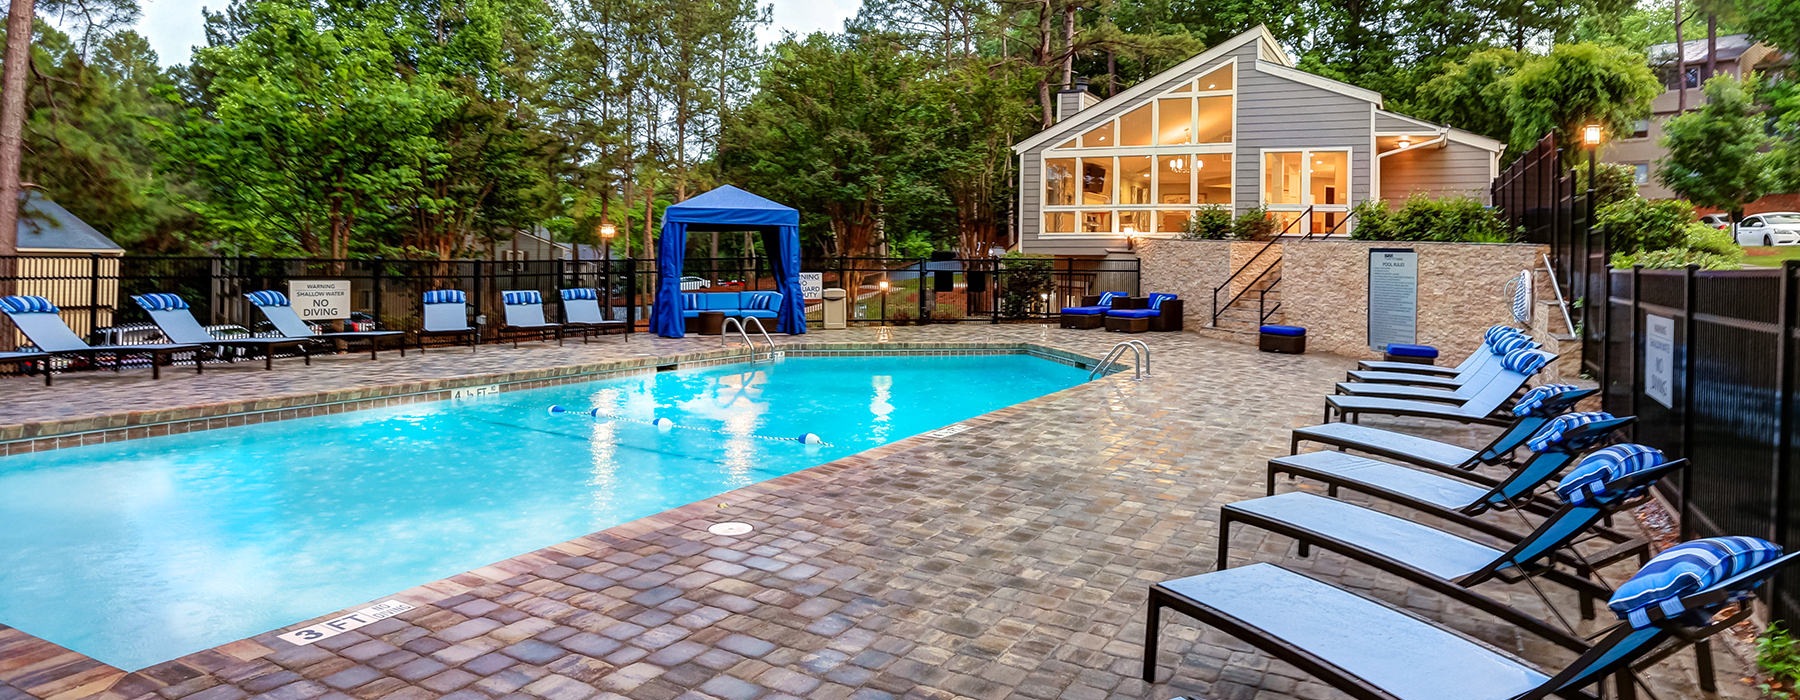 Resort Style Pool with Sundeck at 700 Riverchase Apartments in Hoover, AL